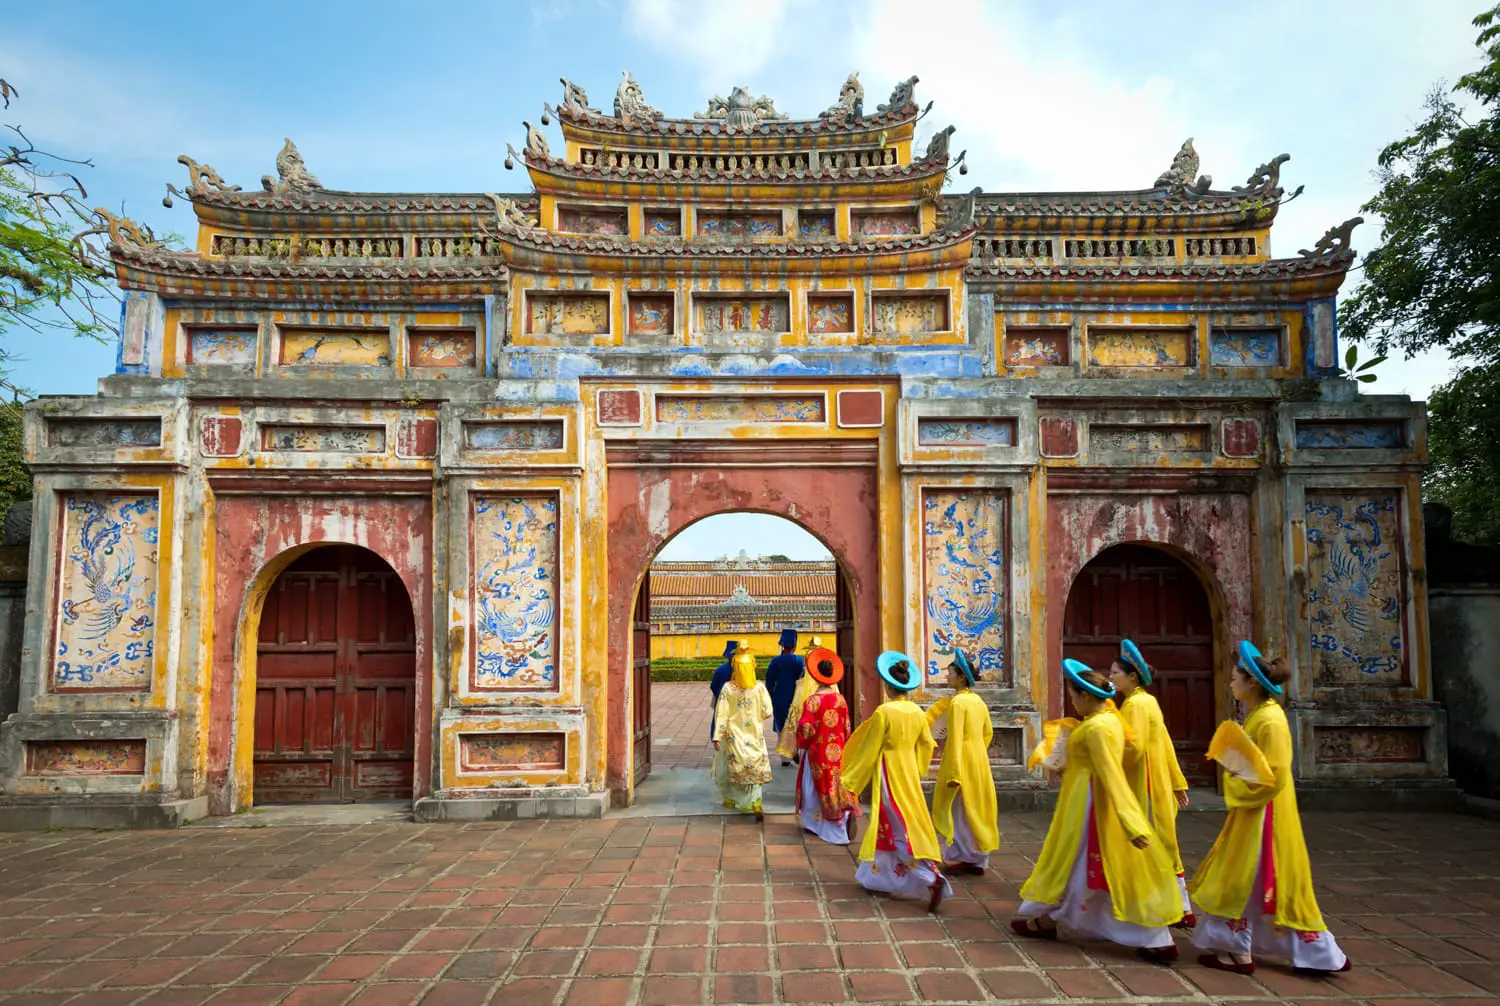 People in traditional costumes walk under an archway in the Imperial City of Hue, Vietnam.